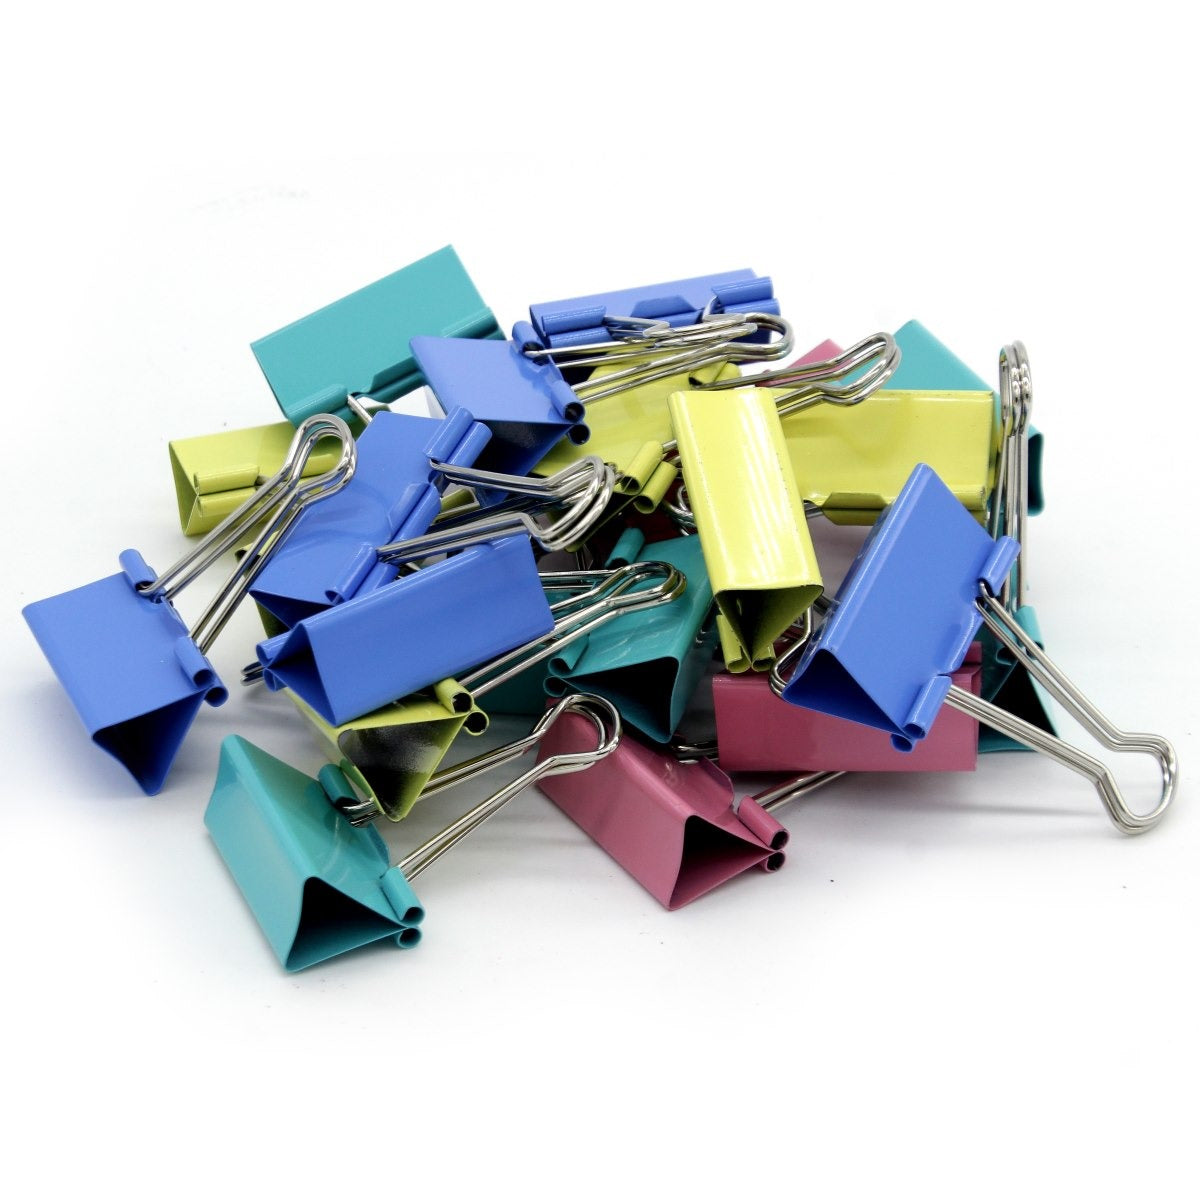 Set of 24 Pcs Binder Clips Assorted Colors 41mm - For Shops, Schools, Corporates, Office Use JABCC41MM